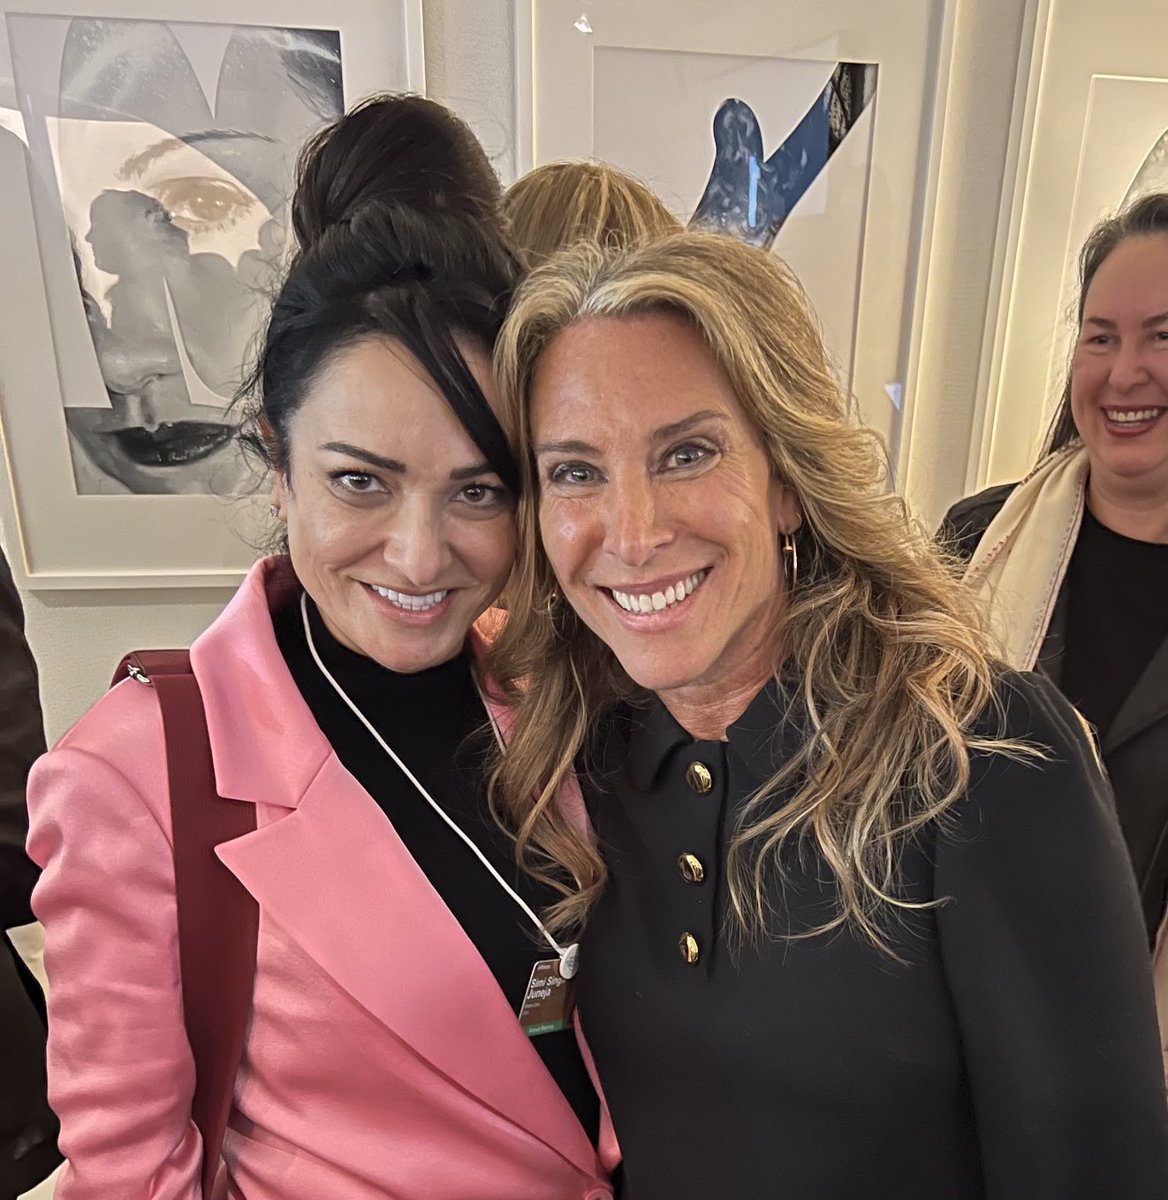 When I came to the #equalitylounge to hear ⁦@shaminasingh⁩ speak, I was floored. What ⁦@ShelleyZalis⁩ & #thefemalequotient have been able to create at #wef23 in Davos is a celebrated space for women to shine in their intellect and talents. #gratitude